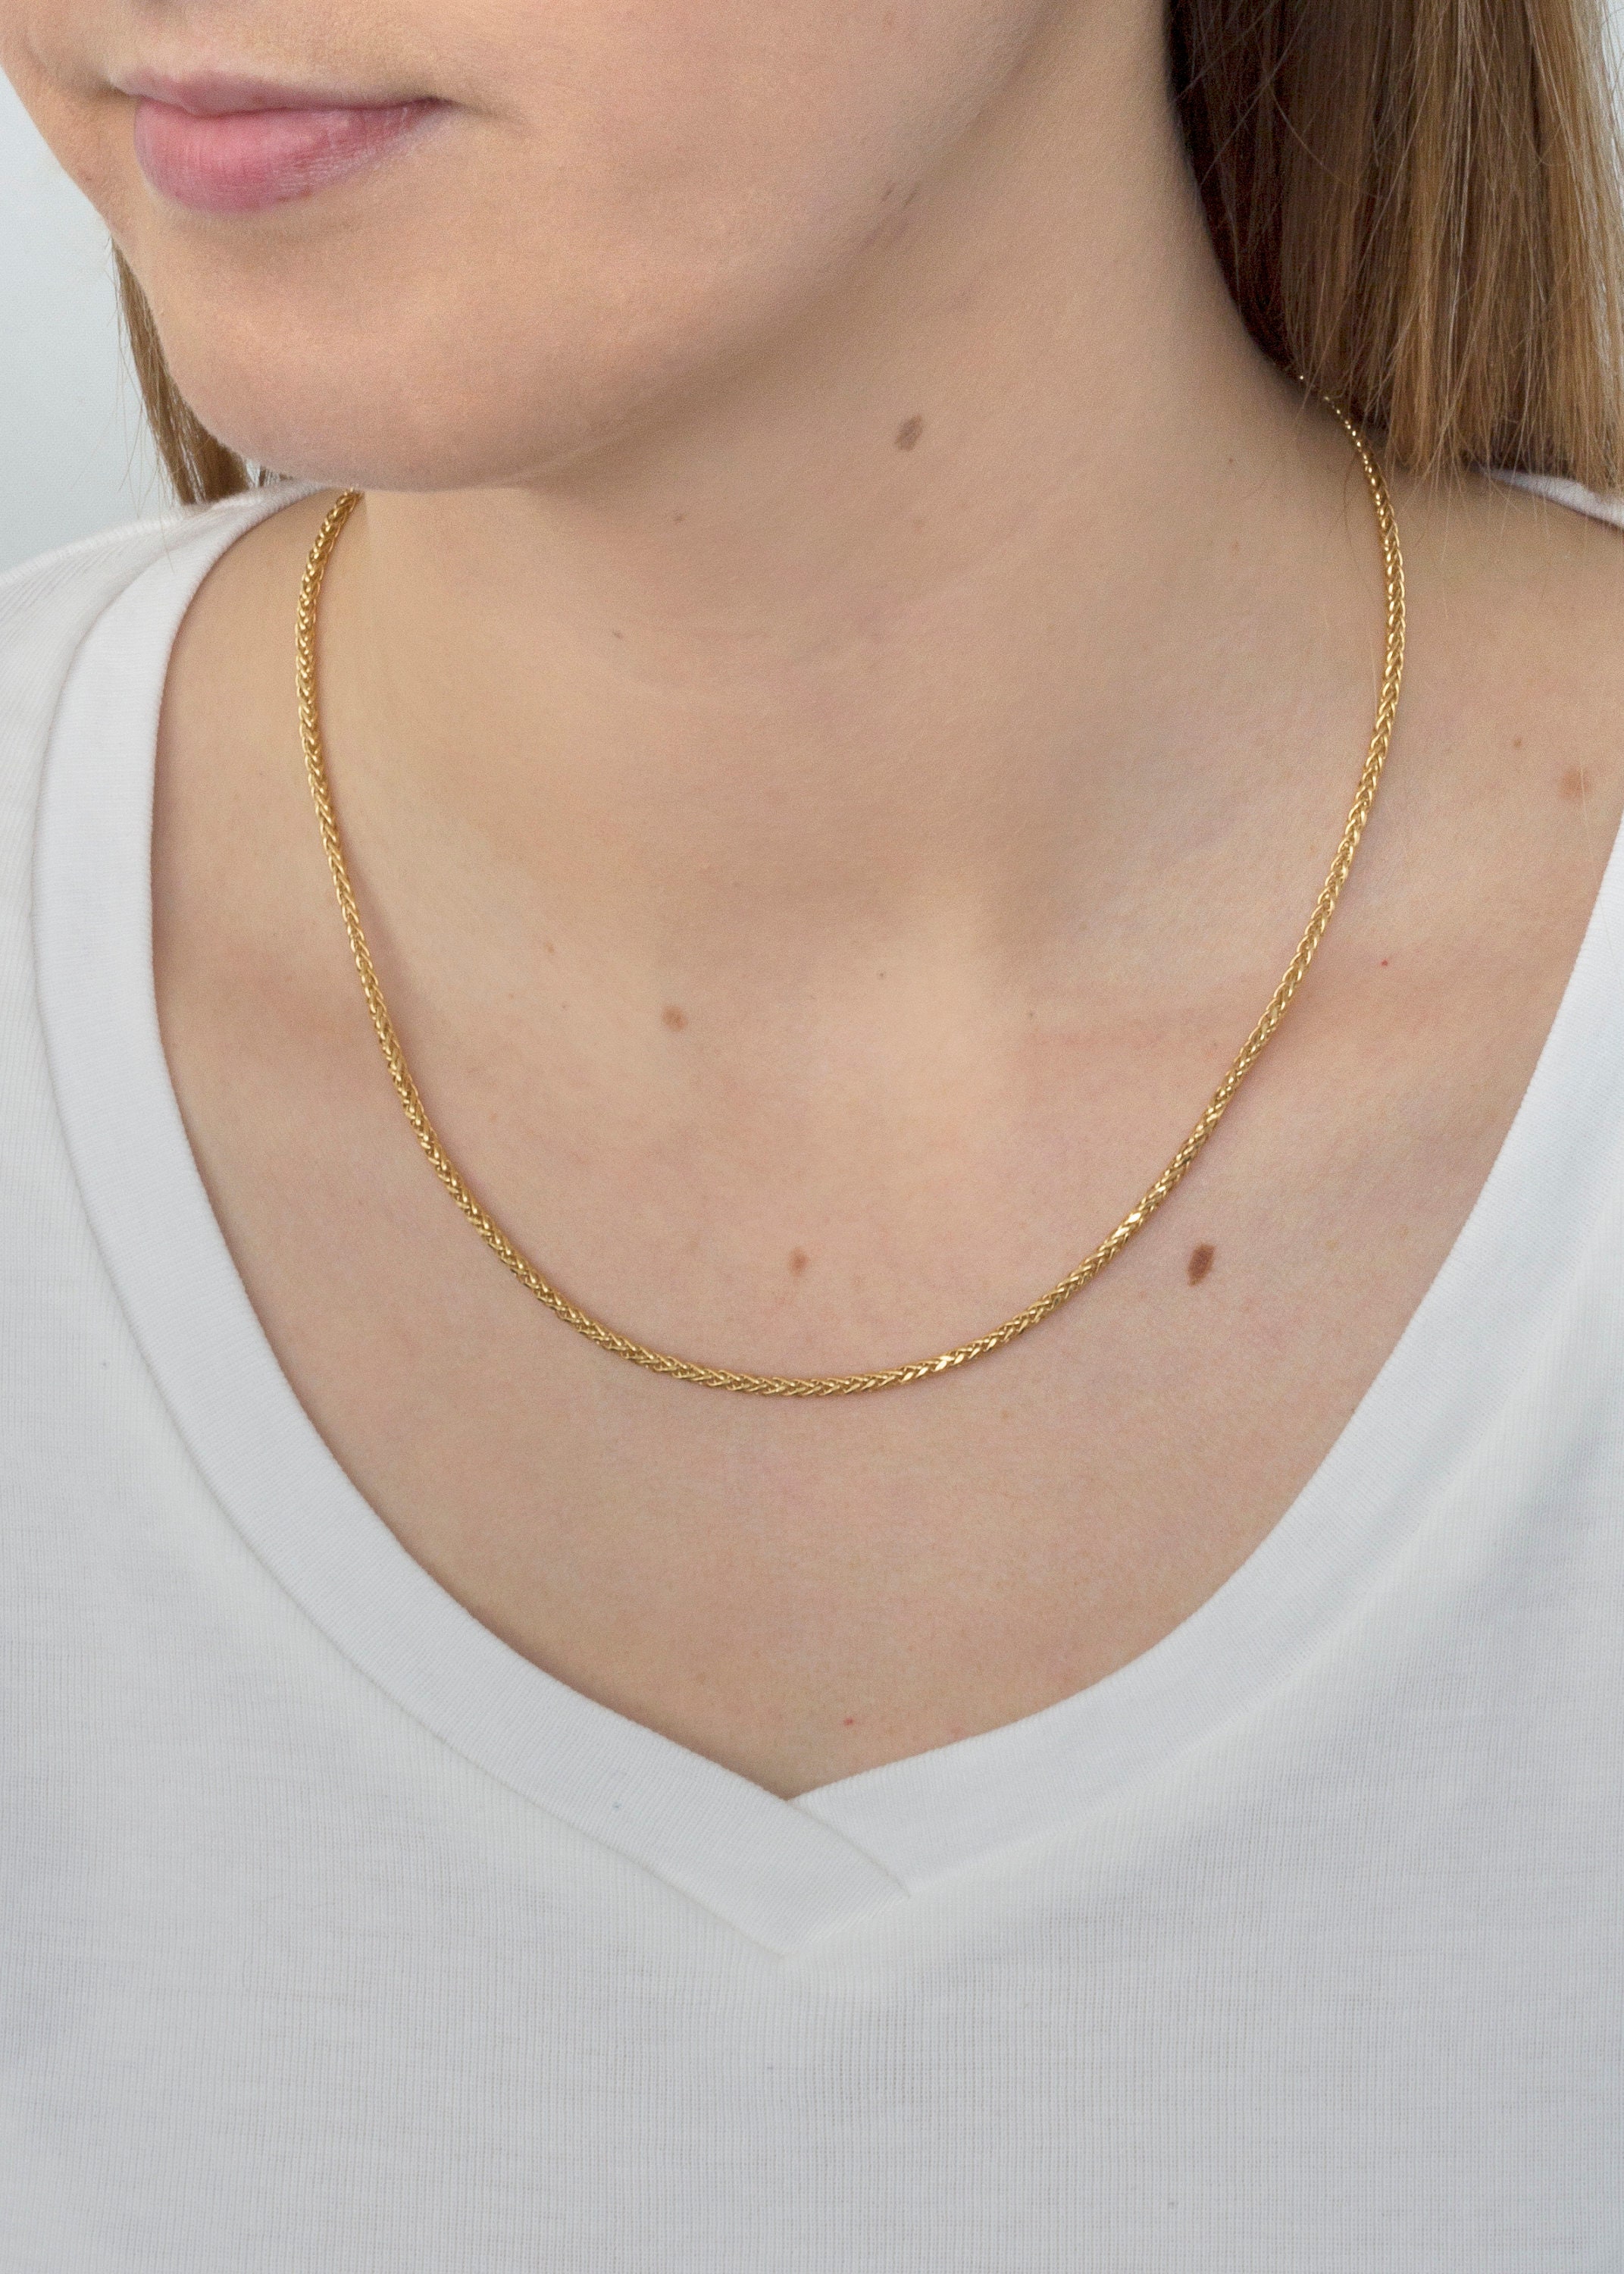 9ct Yellow Gold Spiga Chain Necklace - London Road Jewellery